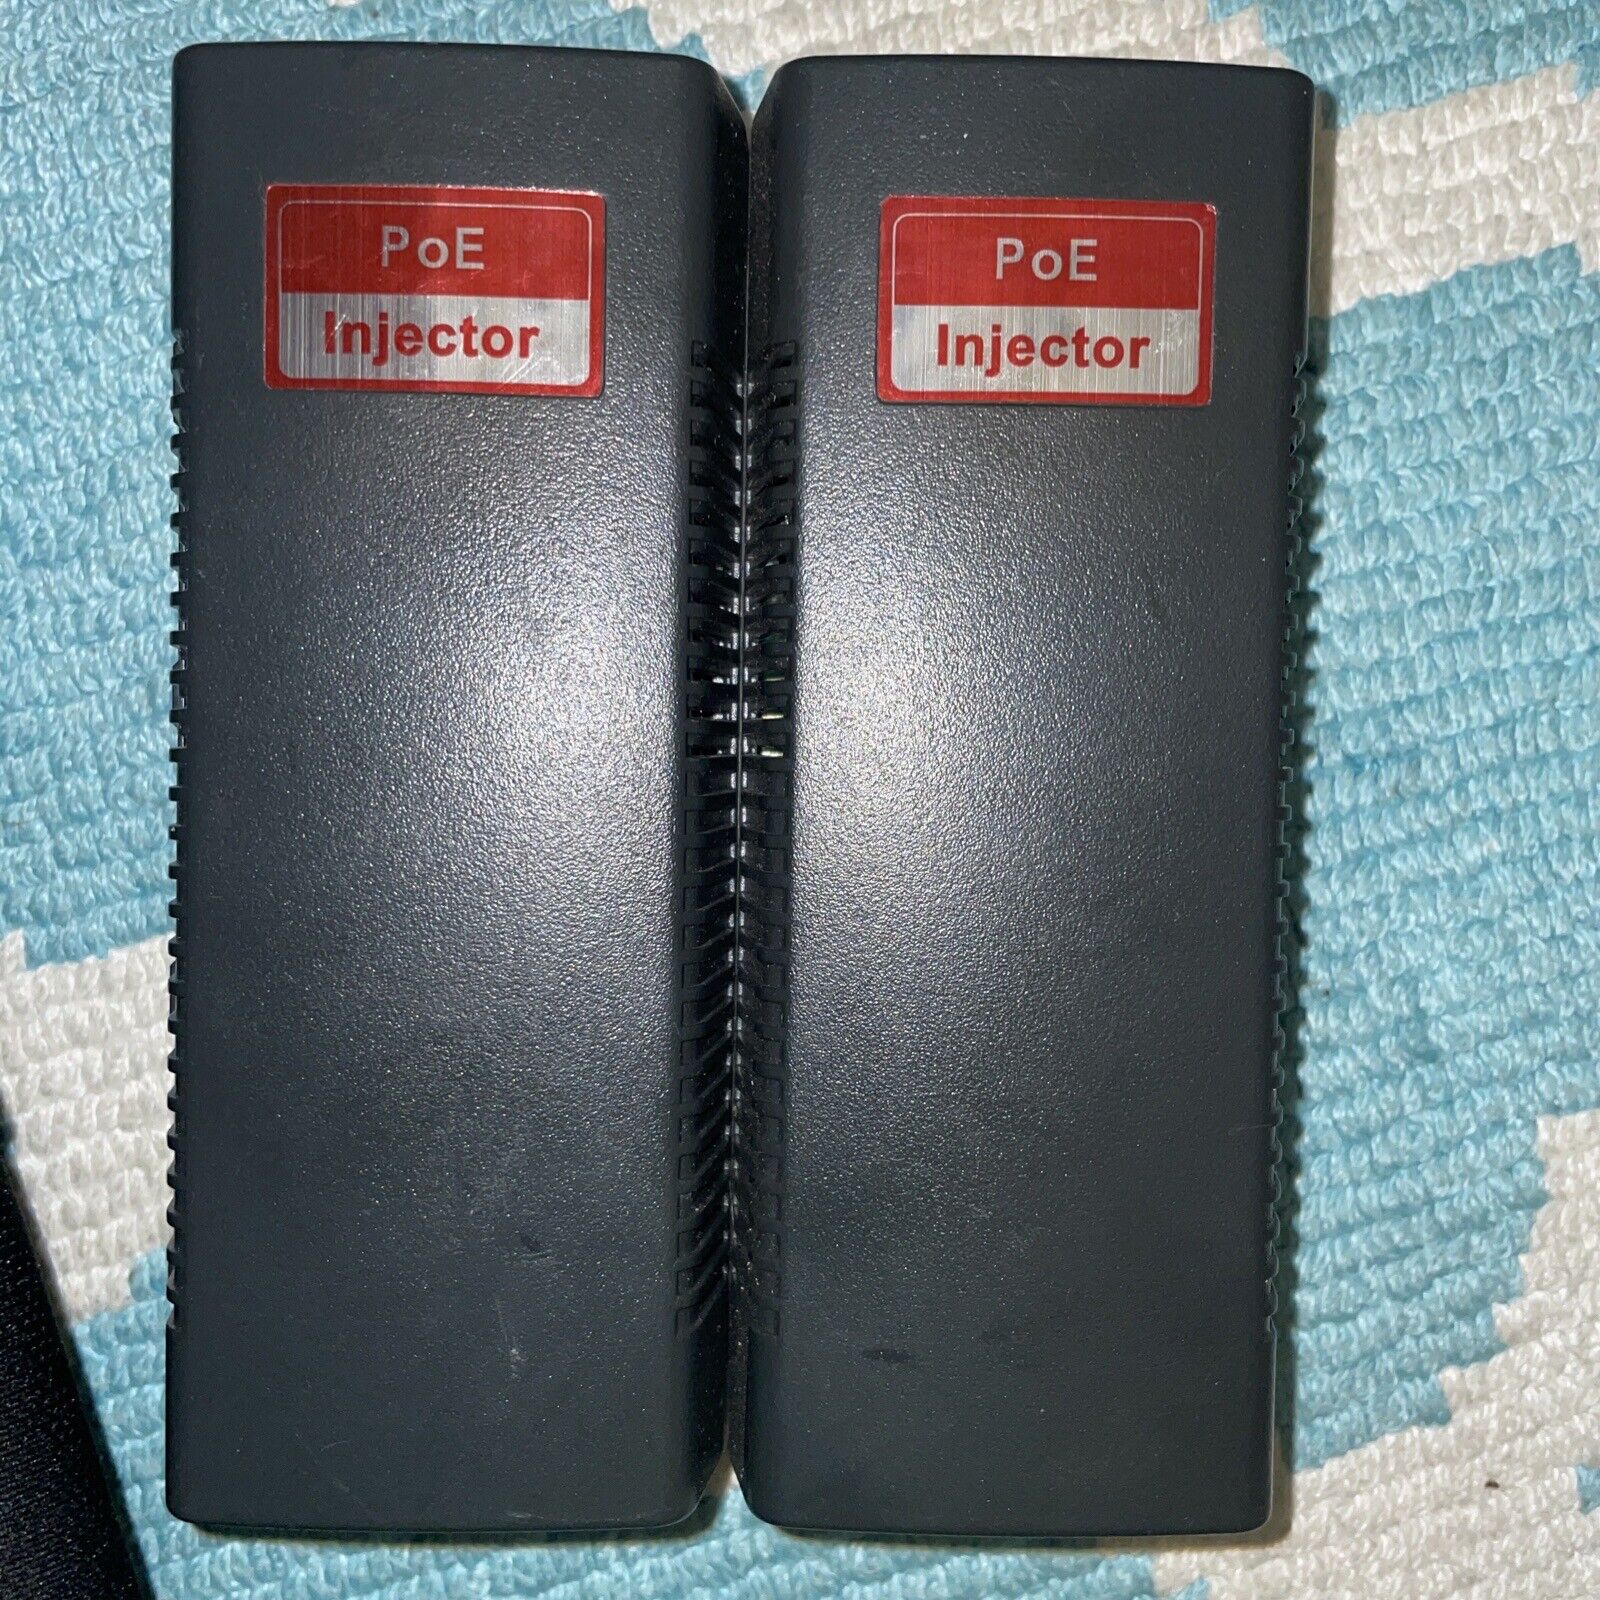 Hanwa PWR-P-POE30 PoE Injector Bundle Of Two - Tested Work. Pair Bargain